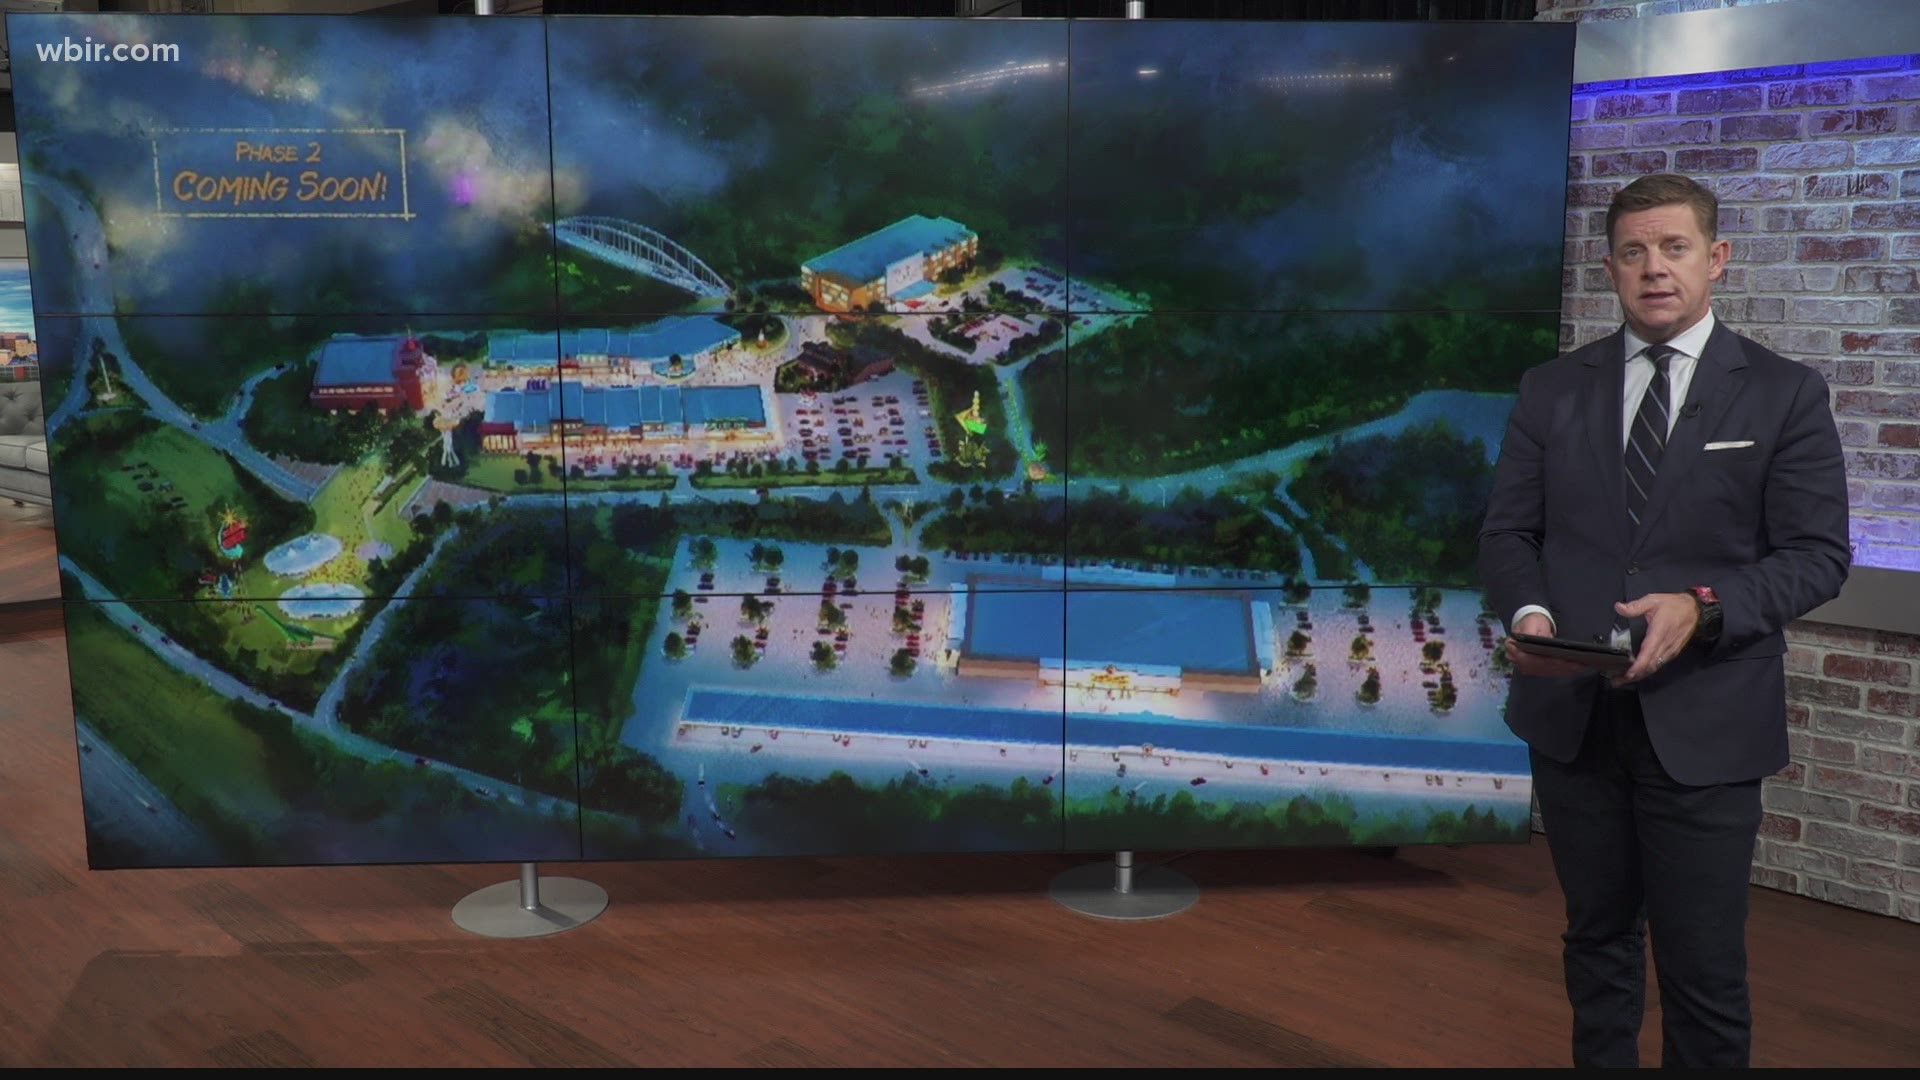 A new tourist attraction broke ground in Sevier County today. The Eastern Band of Cherokee Indians says it will serve as the gateway to Sevierville.